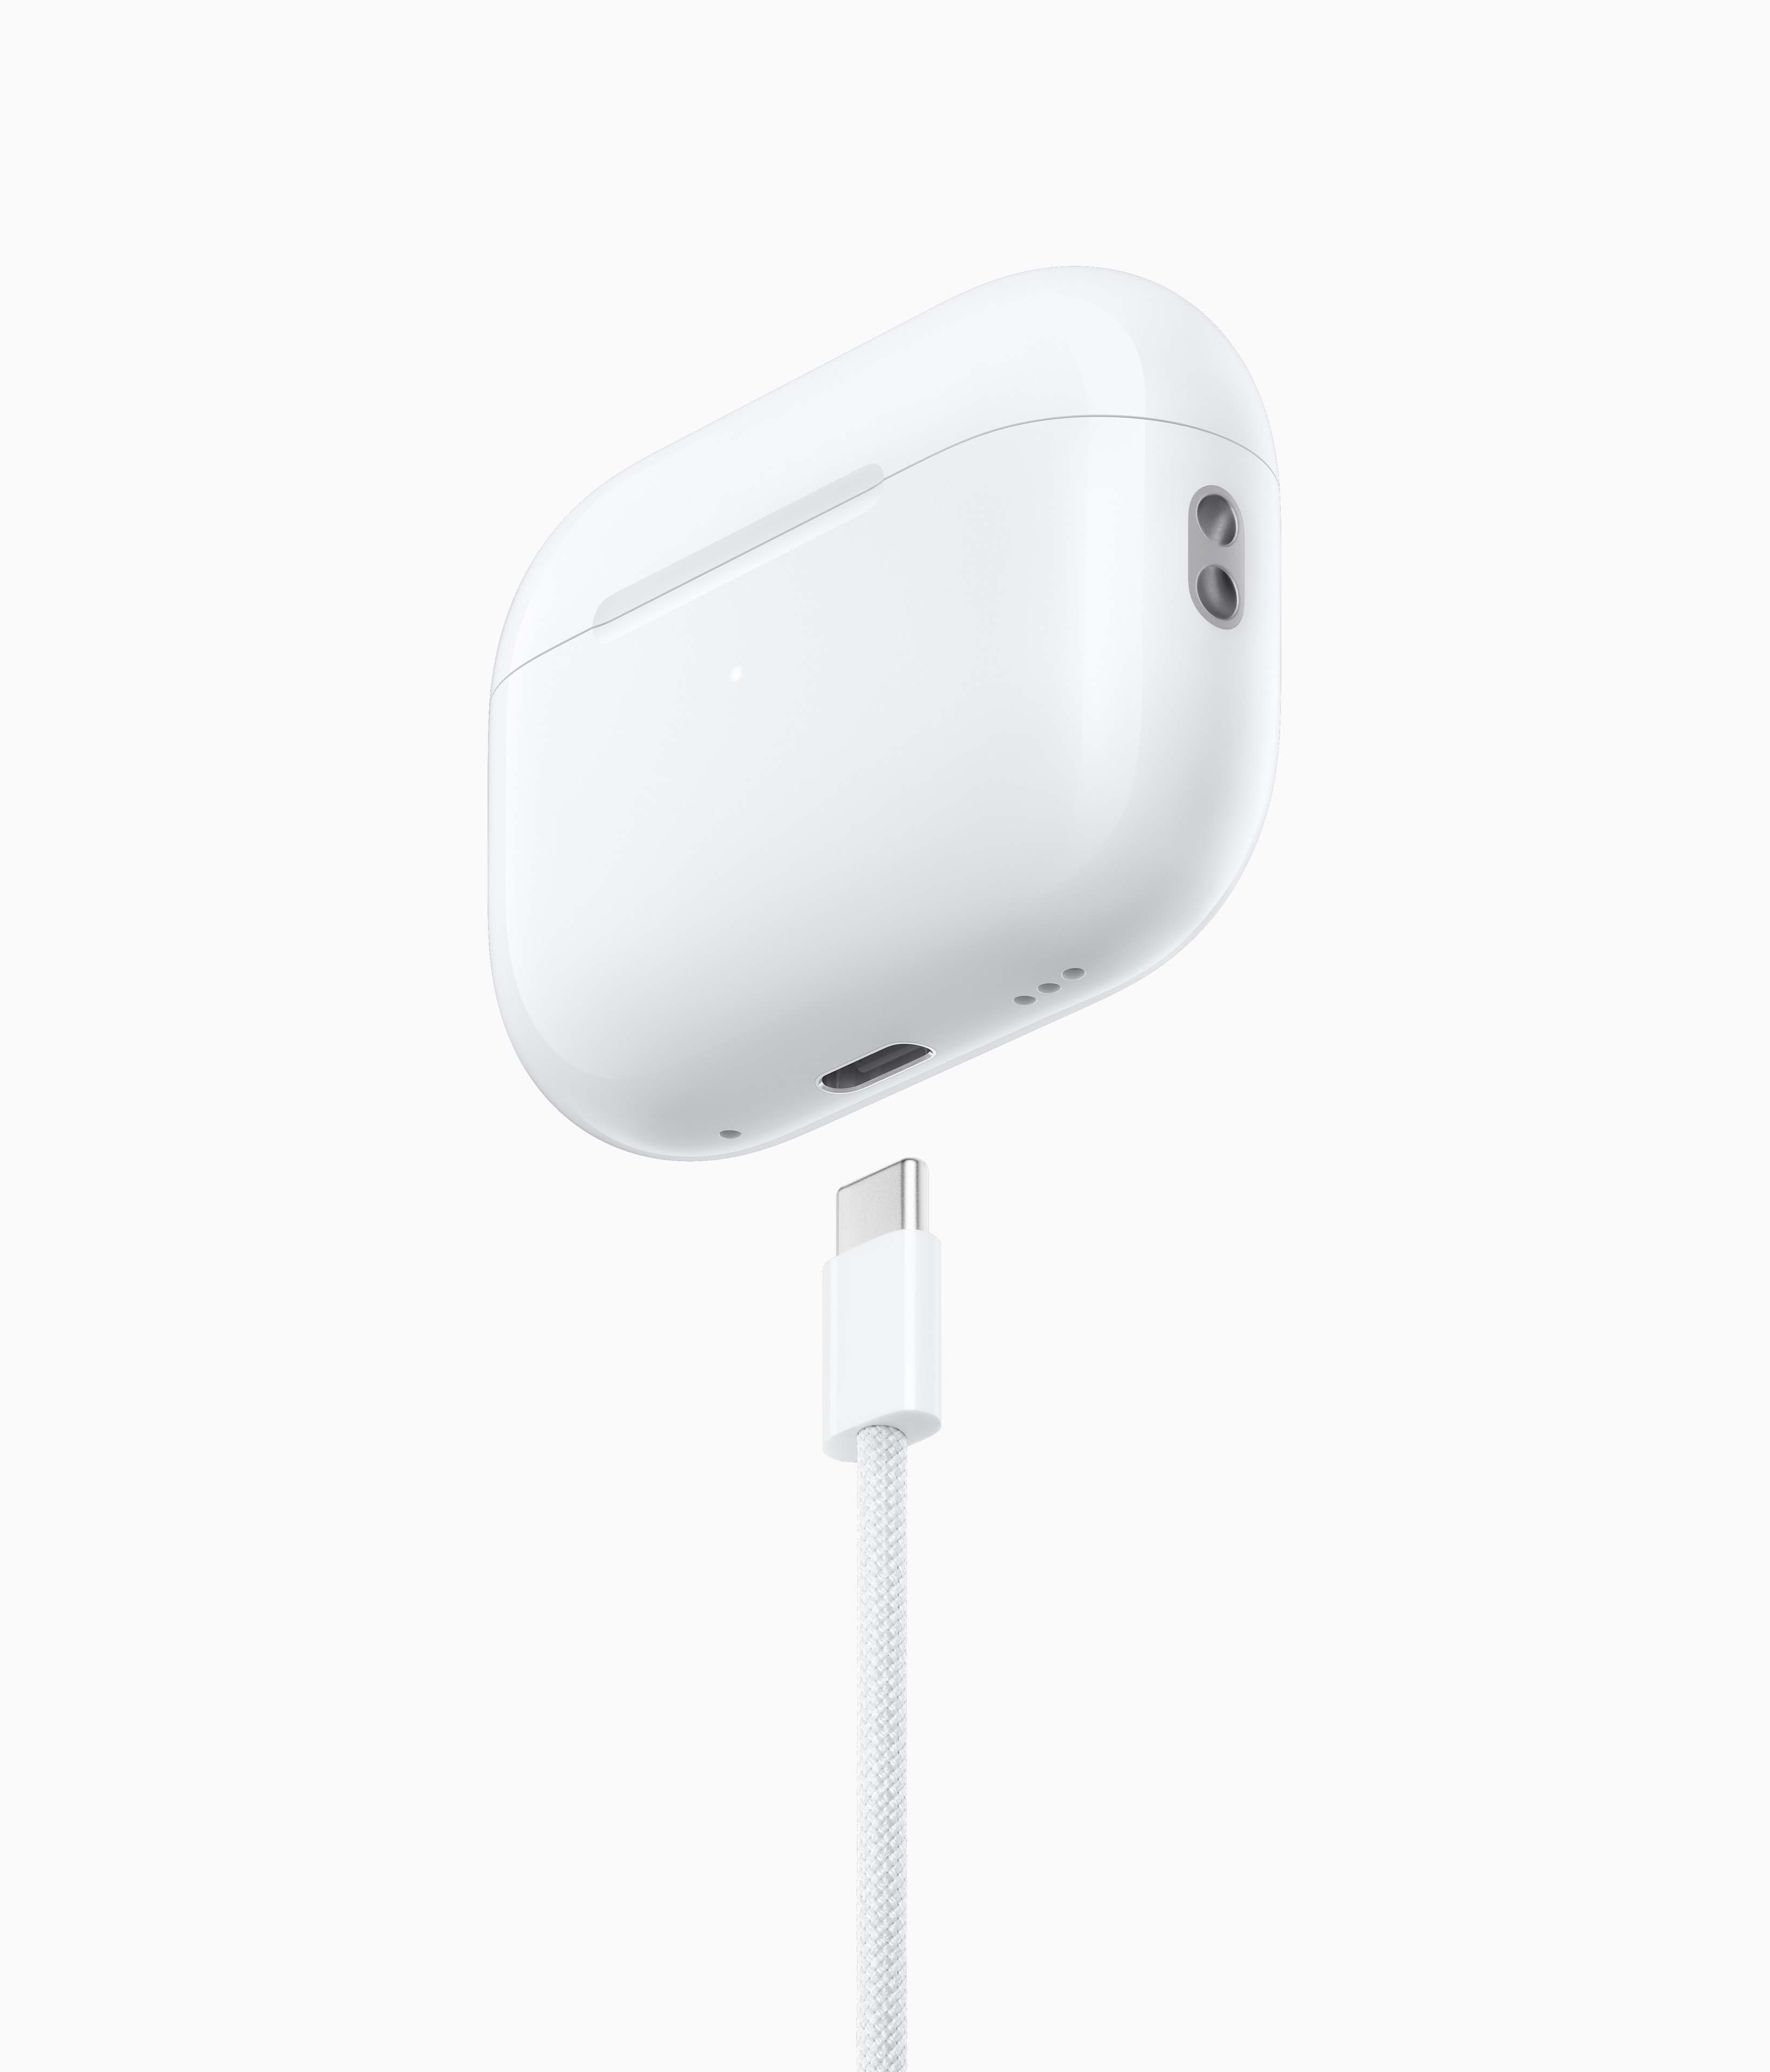 AirPods Pro get USB-C and a few new tricks 2